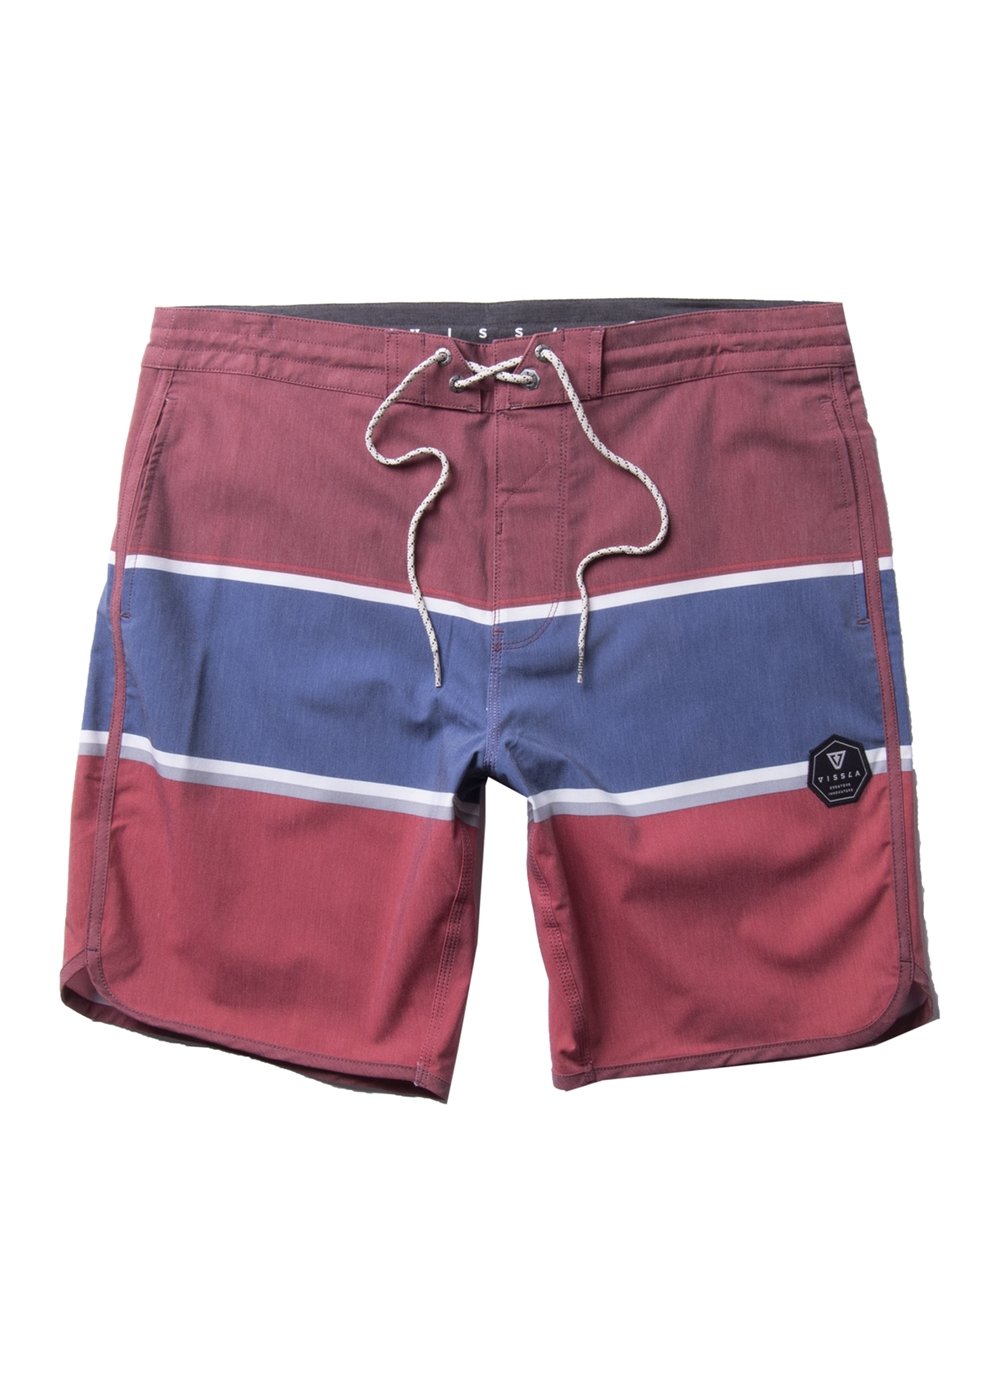 Vissla Blood 17" The Point Boys Boardshort Front View. Multi Color with Patch.